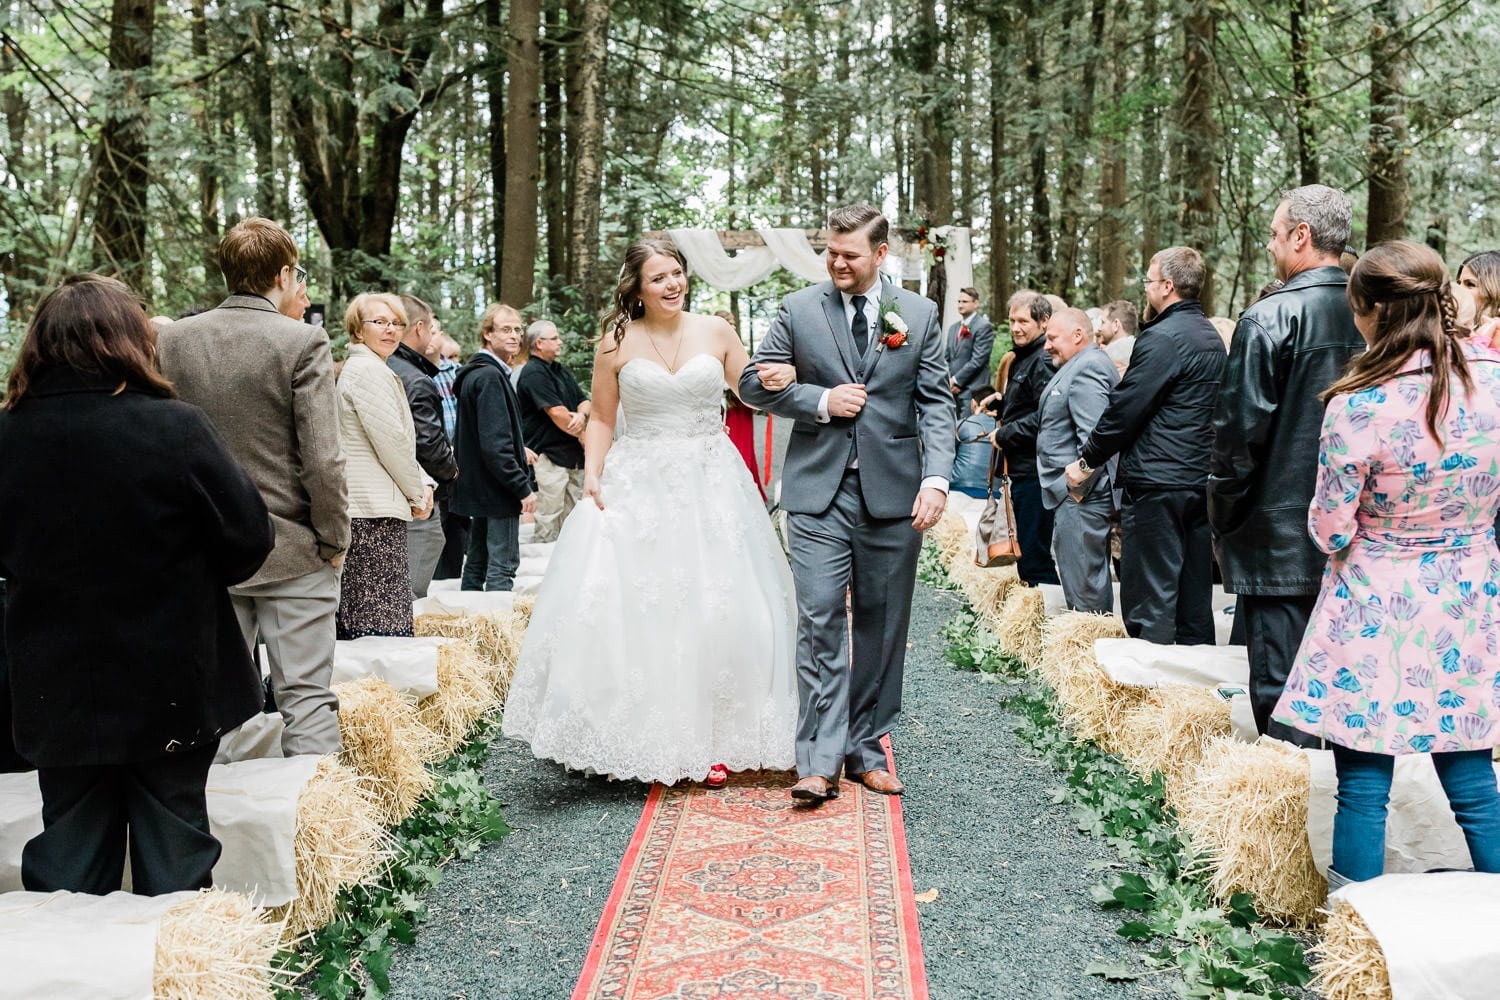 Couple exit after the ceremony | Vancouver wedding photographer